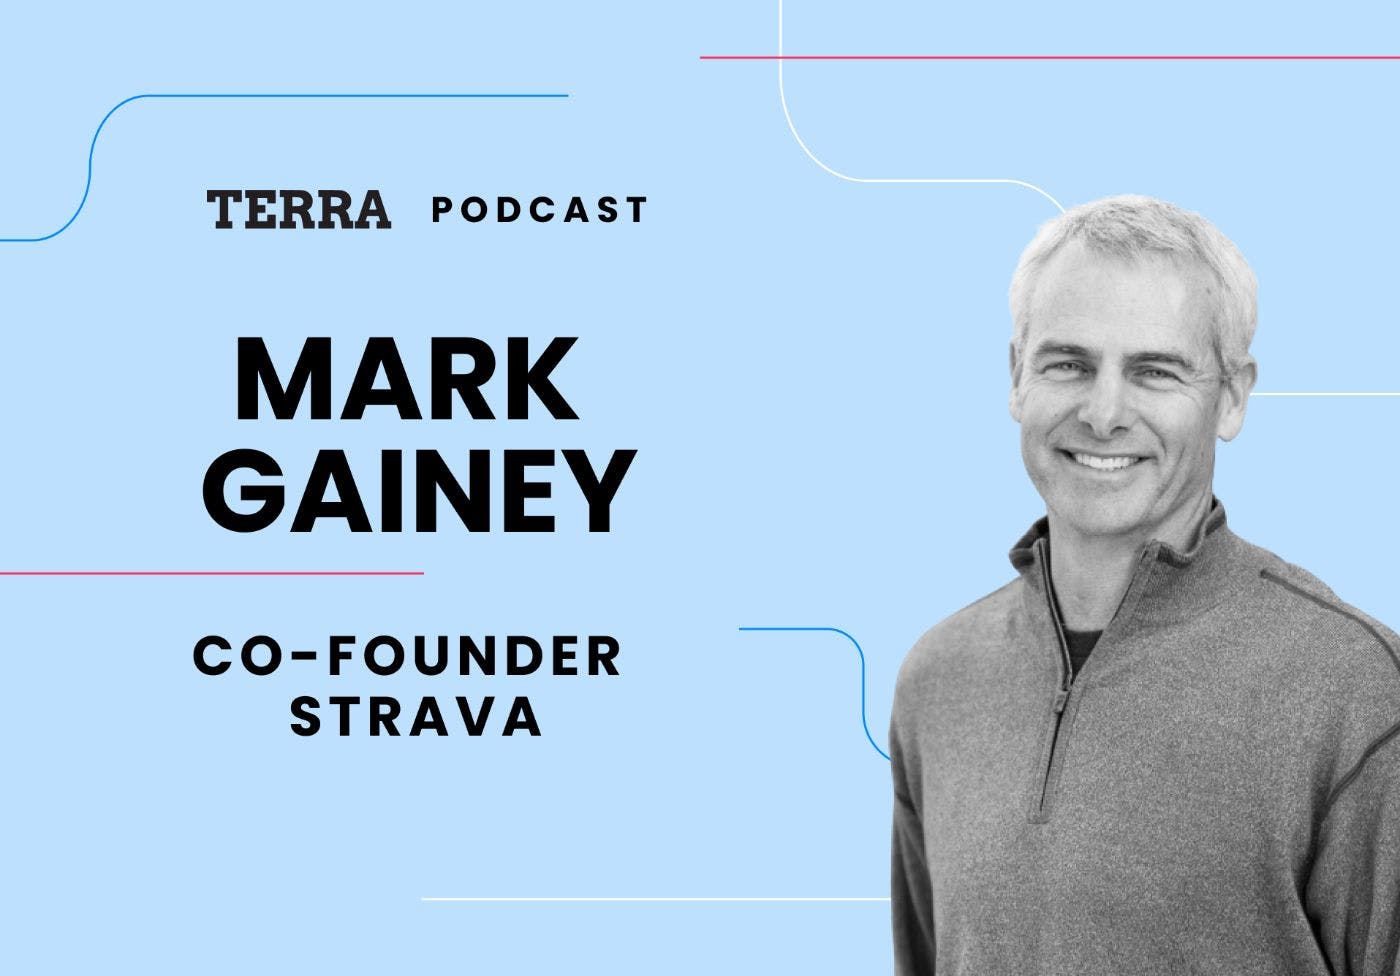 featured image - "The Timing Was Off!" — Strava Co-Founder Mark Gainey on Popularizing Fitness on the Internet